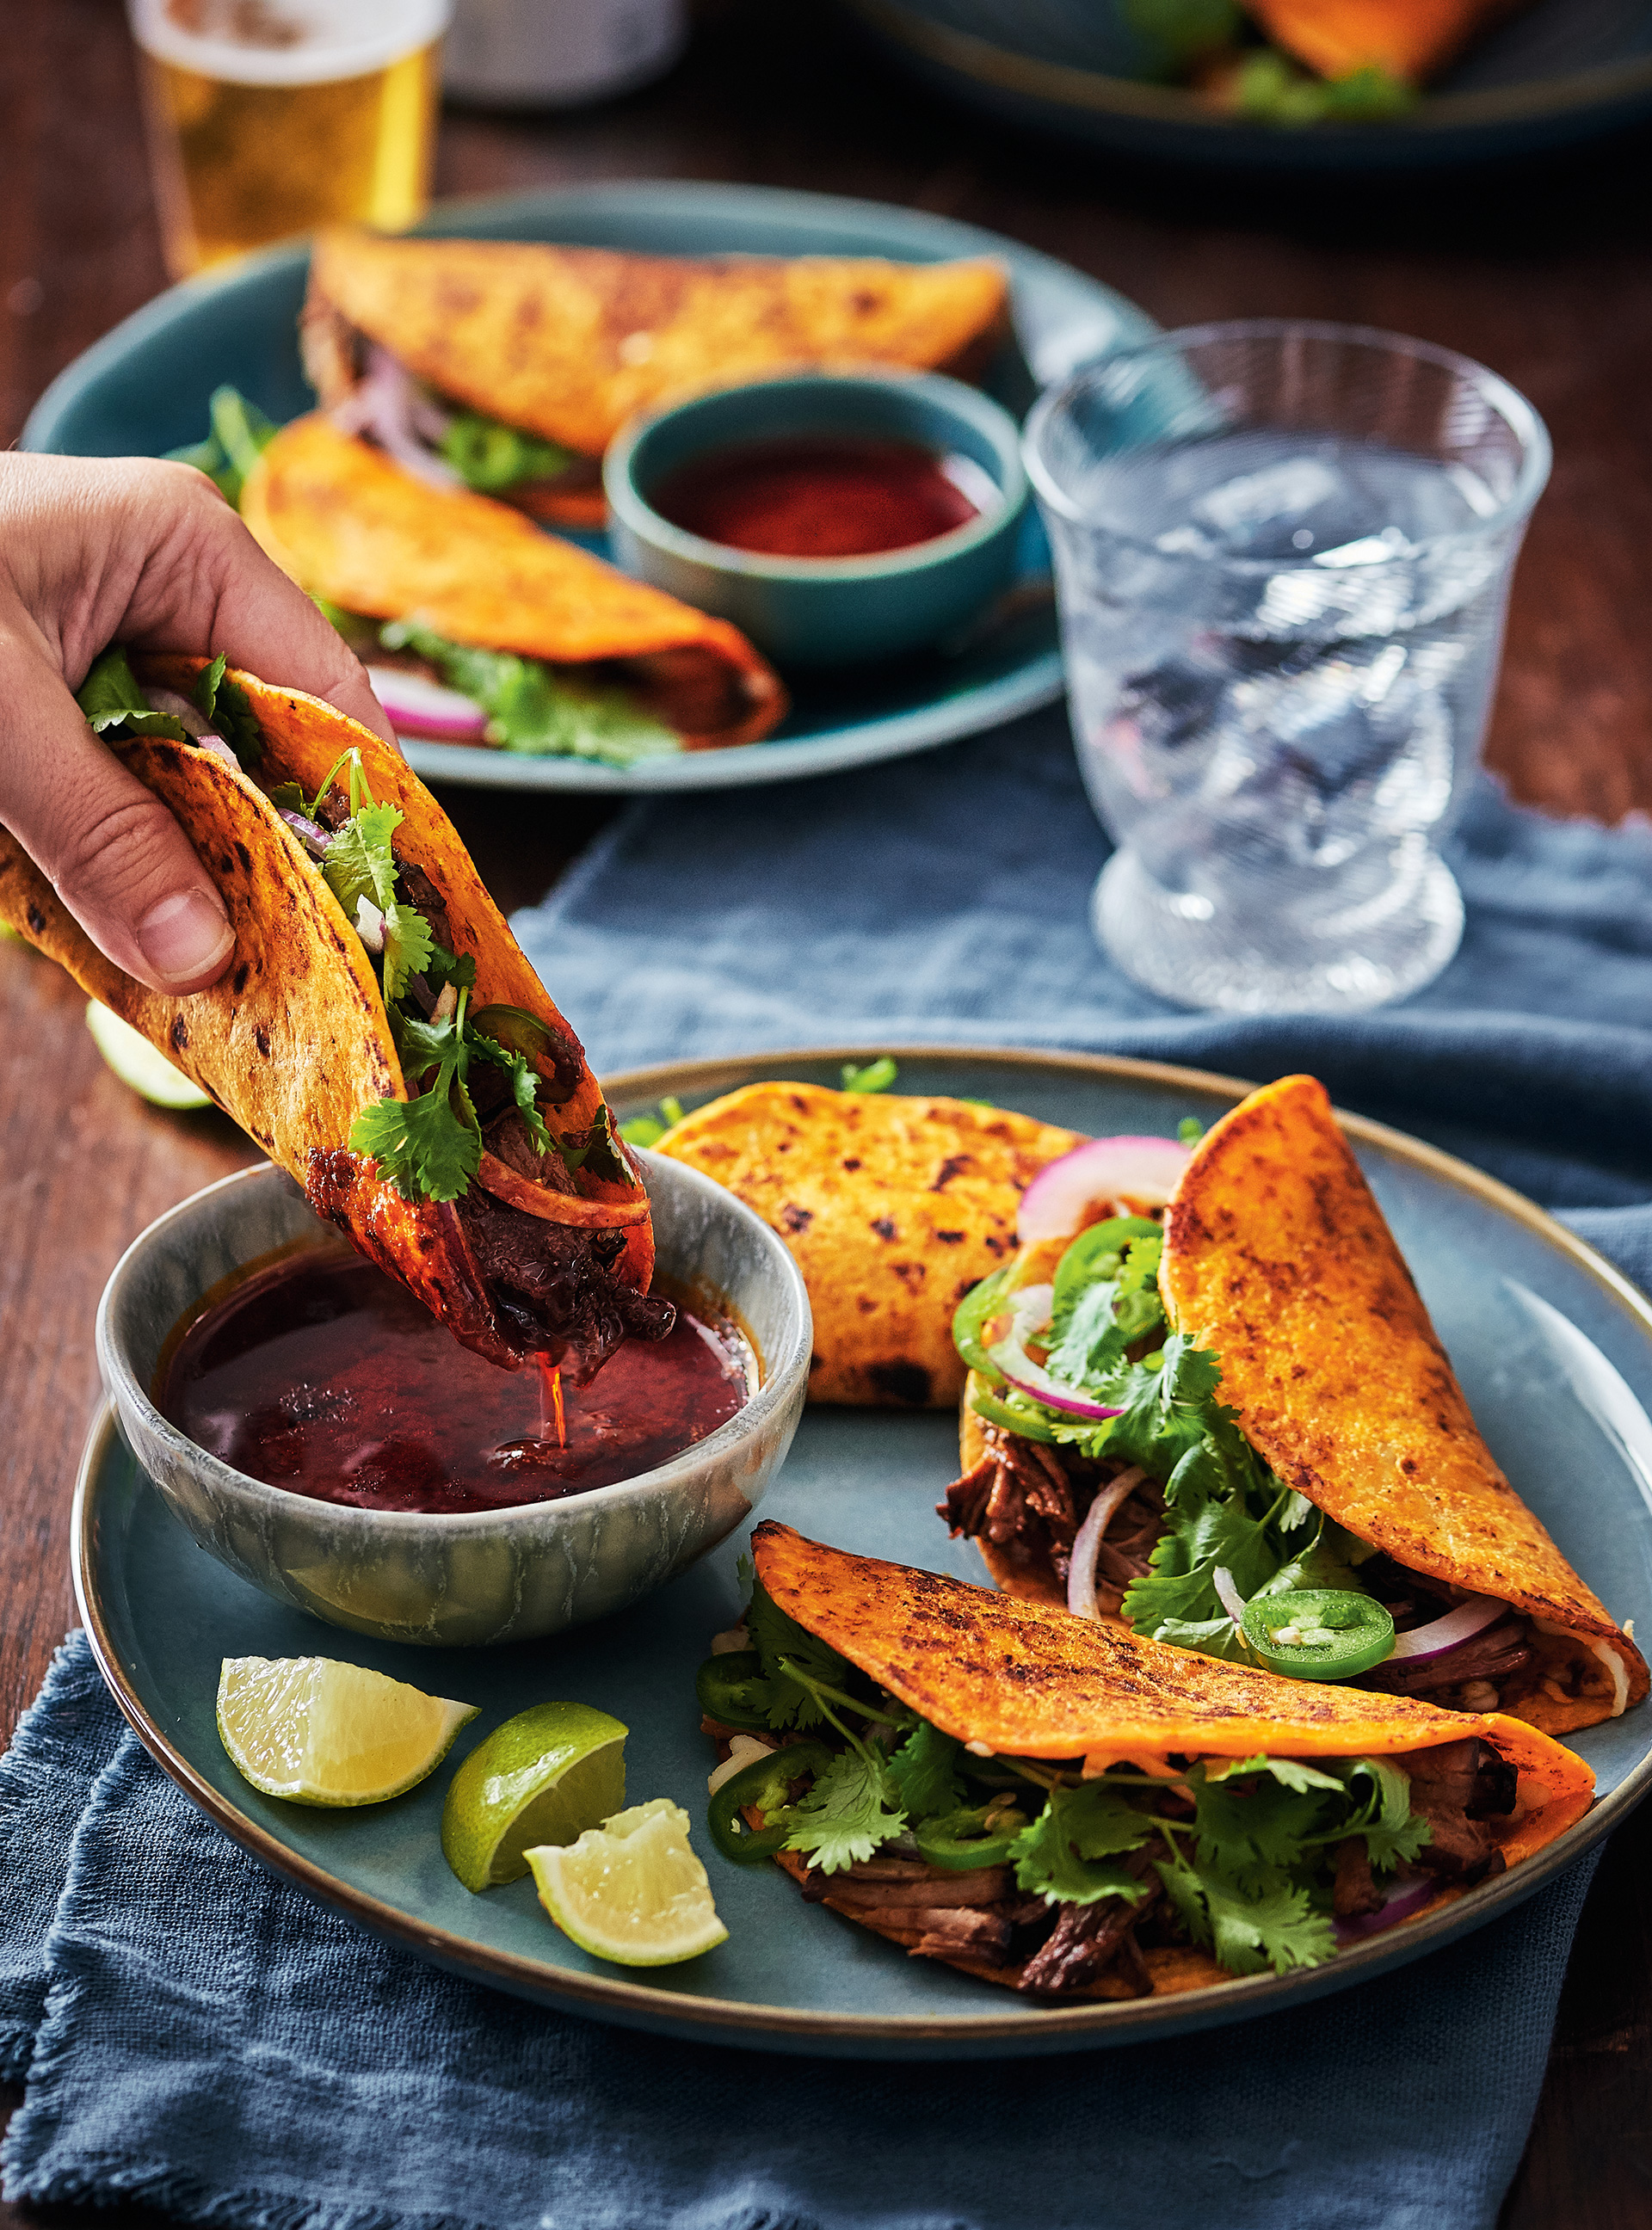 Braised Beef and Cheese Tacos (Quesabirria)